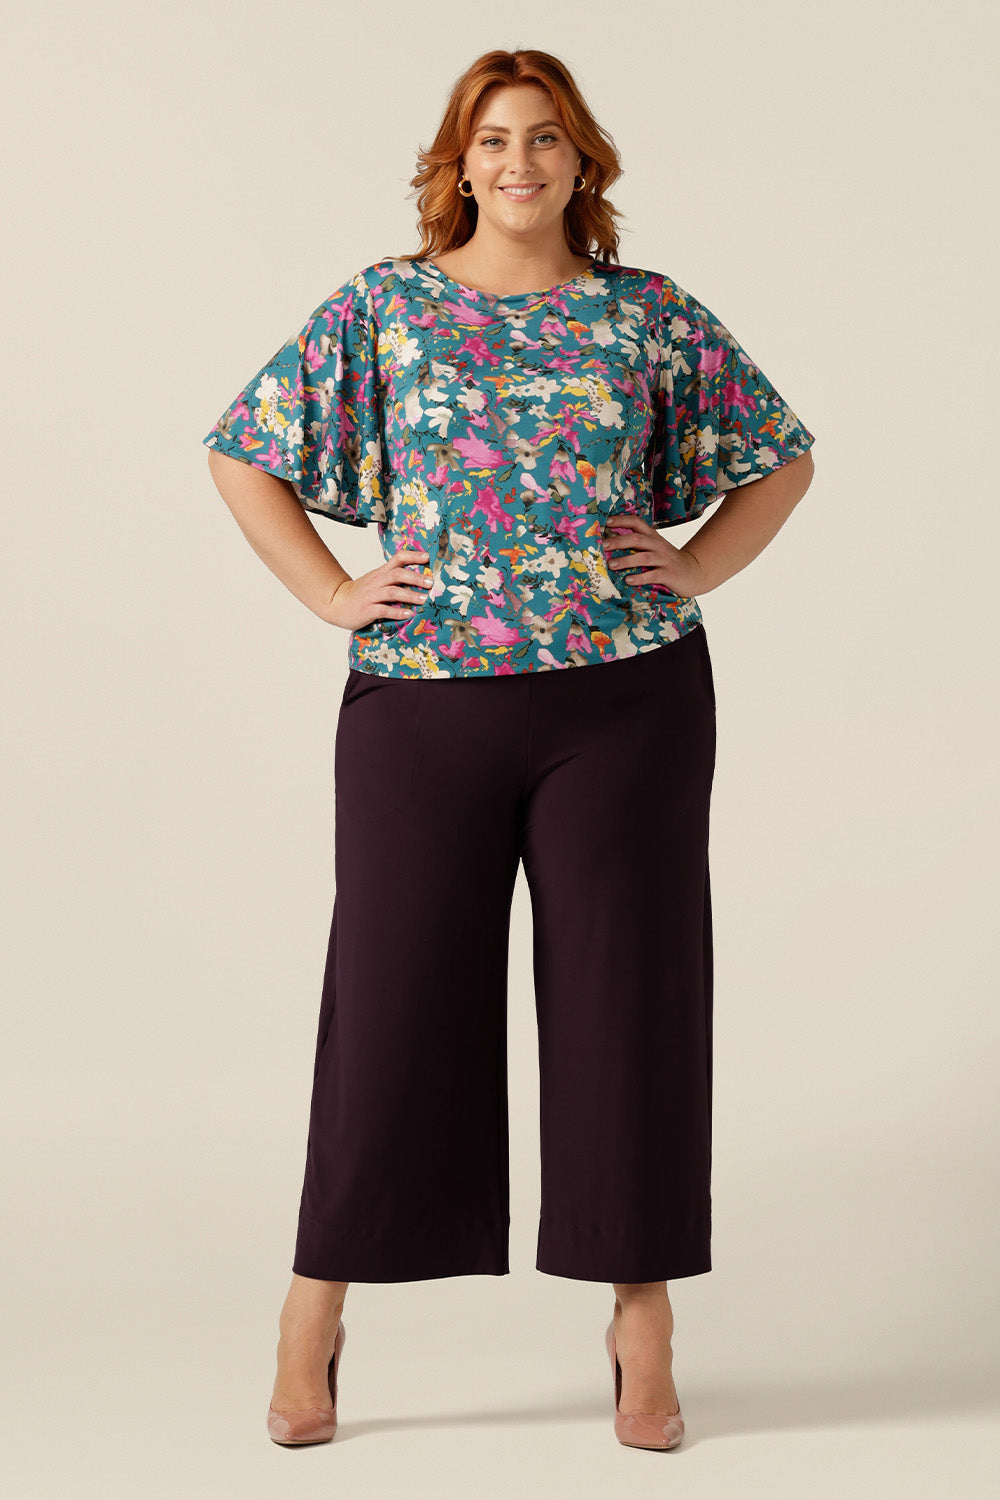 Curvy woman wearing a floral print jersey top with flutter sleeves. The top is made in Australia by Leina and Fleur, who specialise in quality tops, dresses and pants for petite to plus size women for work, travel and casual wear.